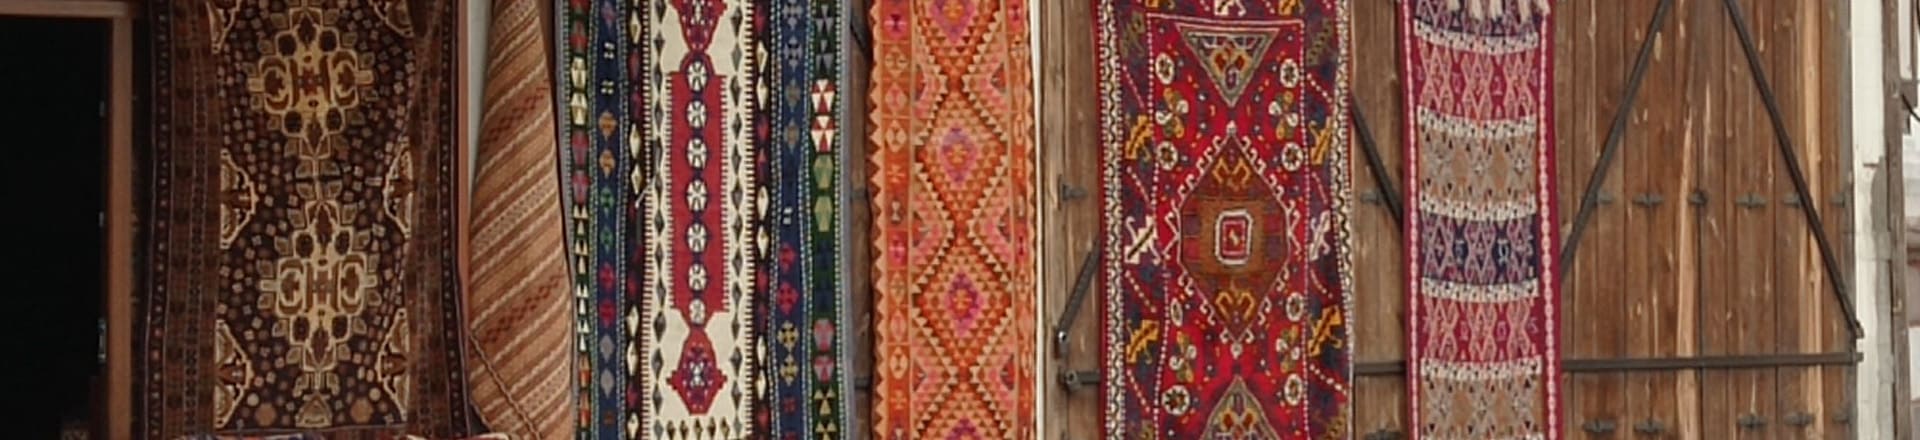 11Preserve Your Oriental Rugs with Expert Care Tips & Services